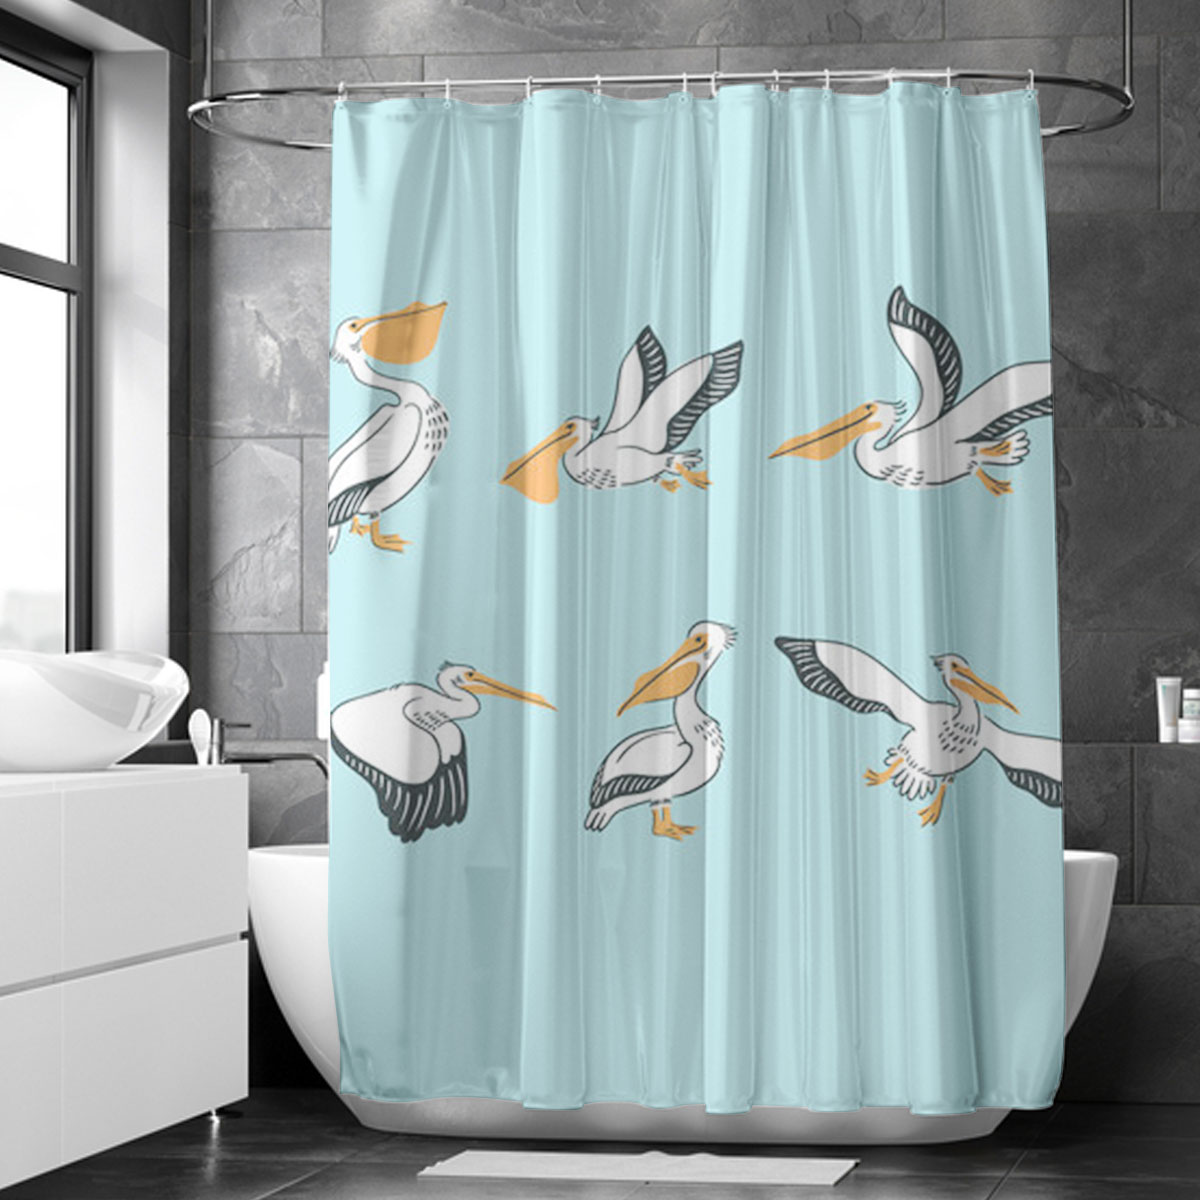 Positions Pelicans Coon Shower Curtain